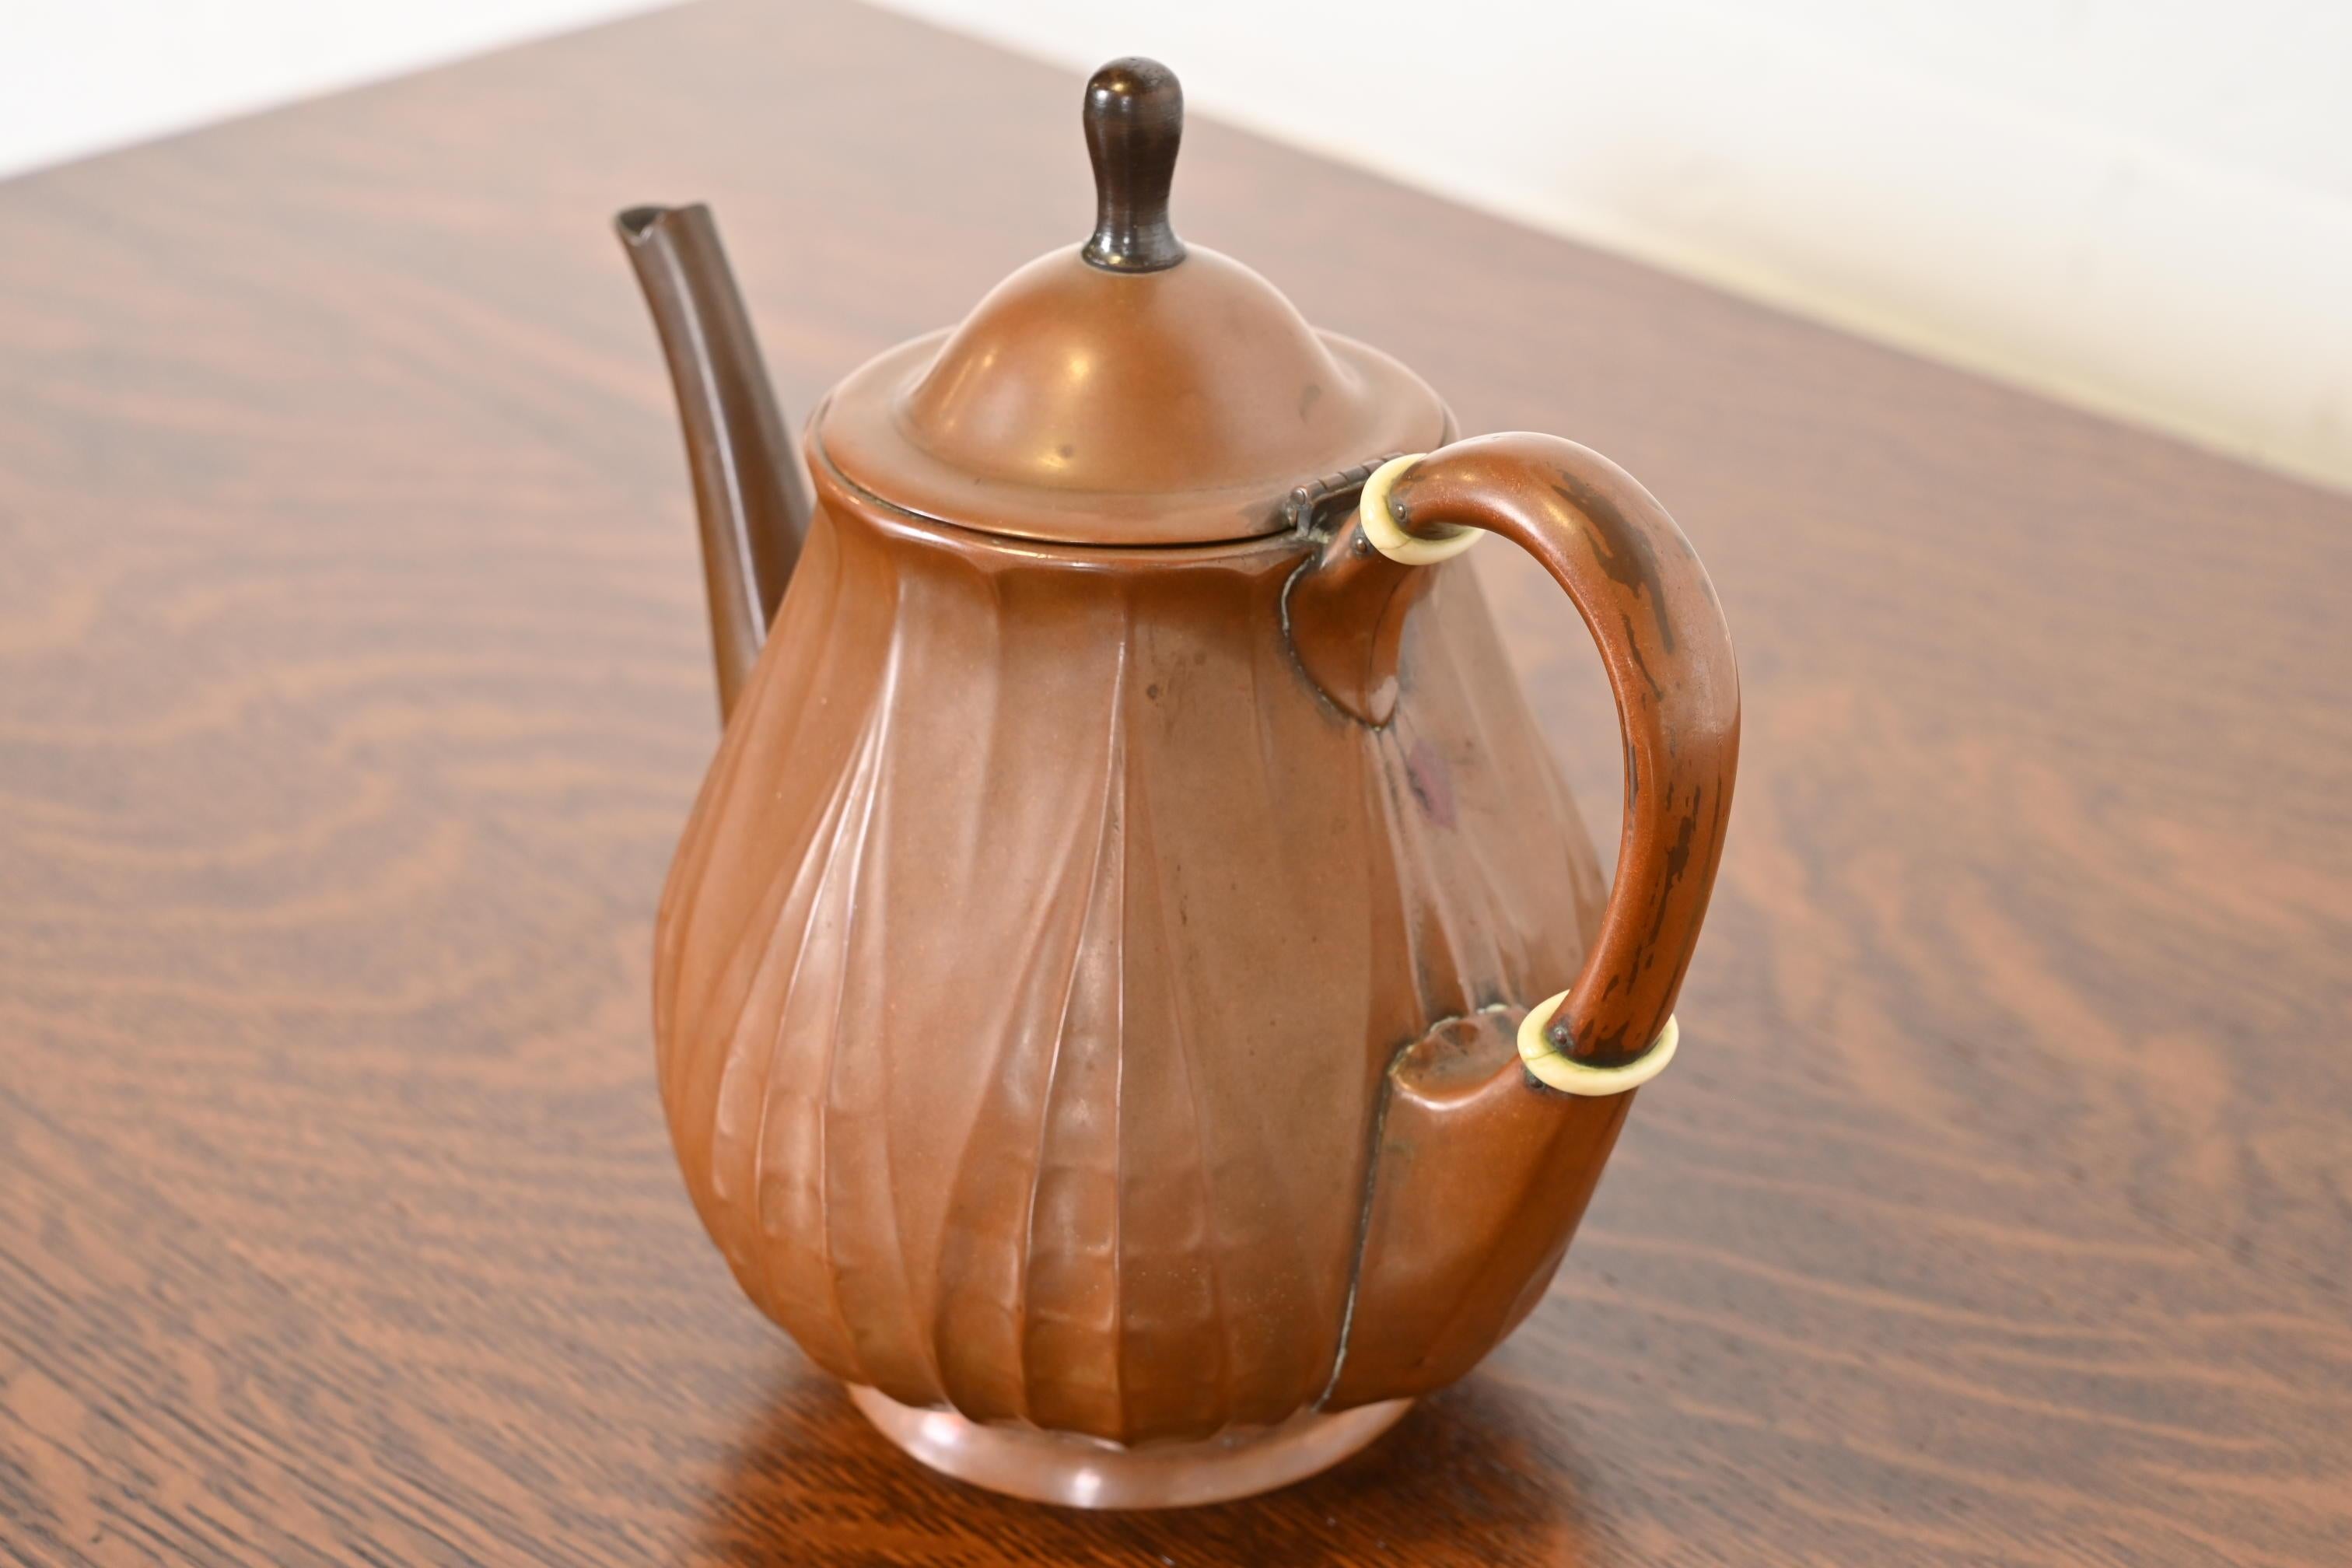 Tiffany Studios New York Arts & Crafts Copper Tea Kettle, Circa 1910 In Good Condition For Sale In South Bend, IN